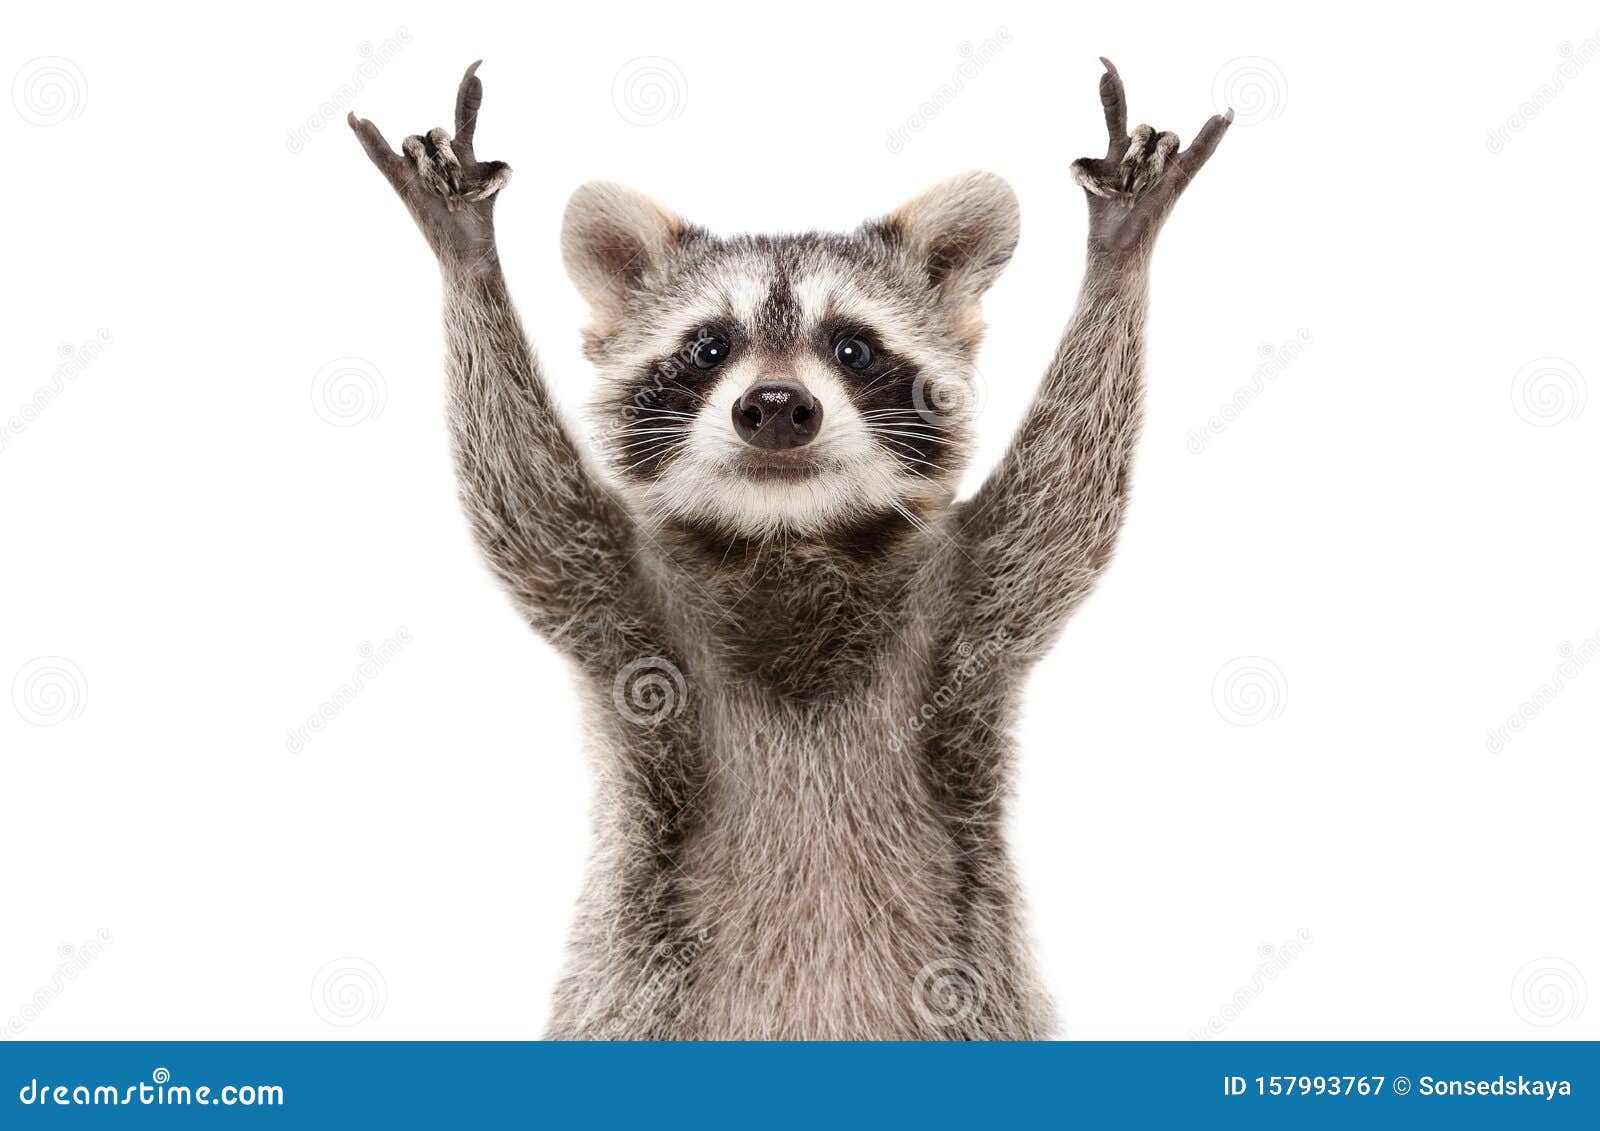 Funny Cute Raccoon Showing a Rock Gesture Stock Image - Image of charming,  gesture: 157993767